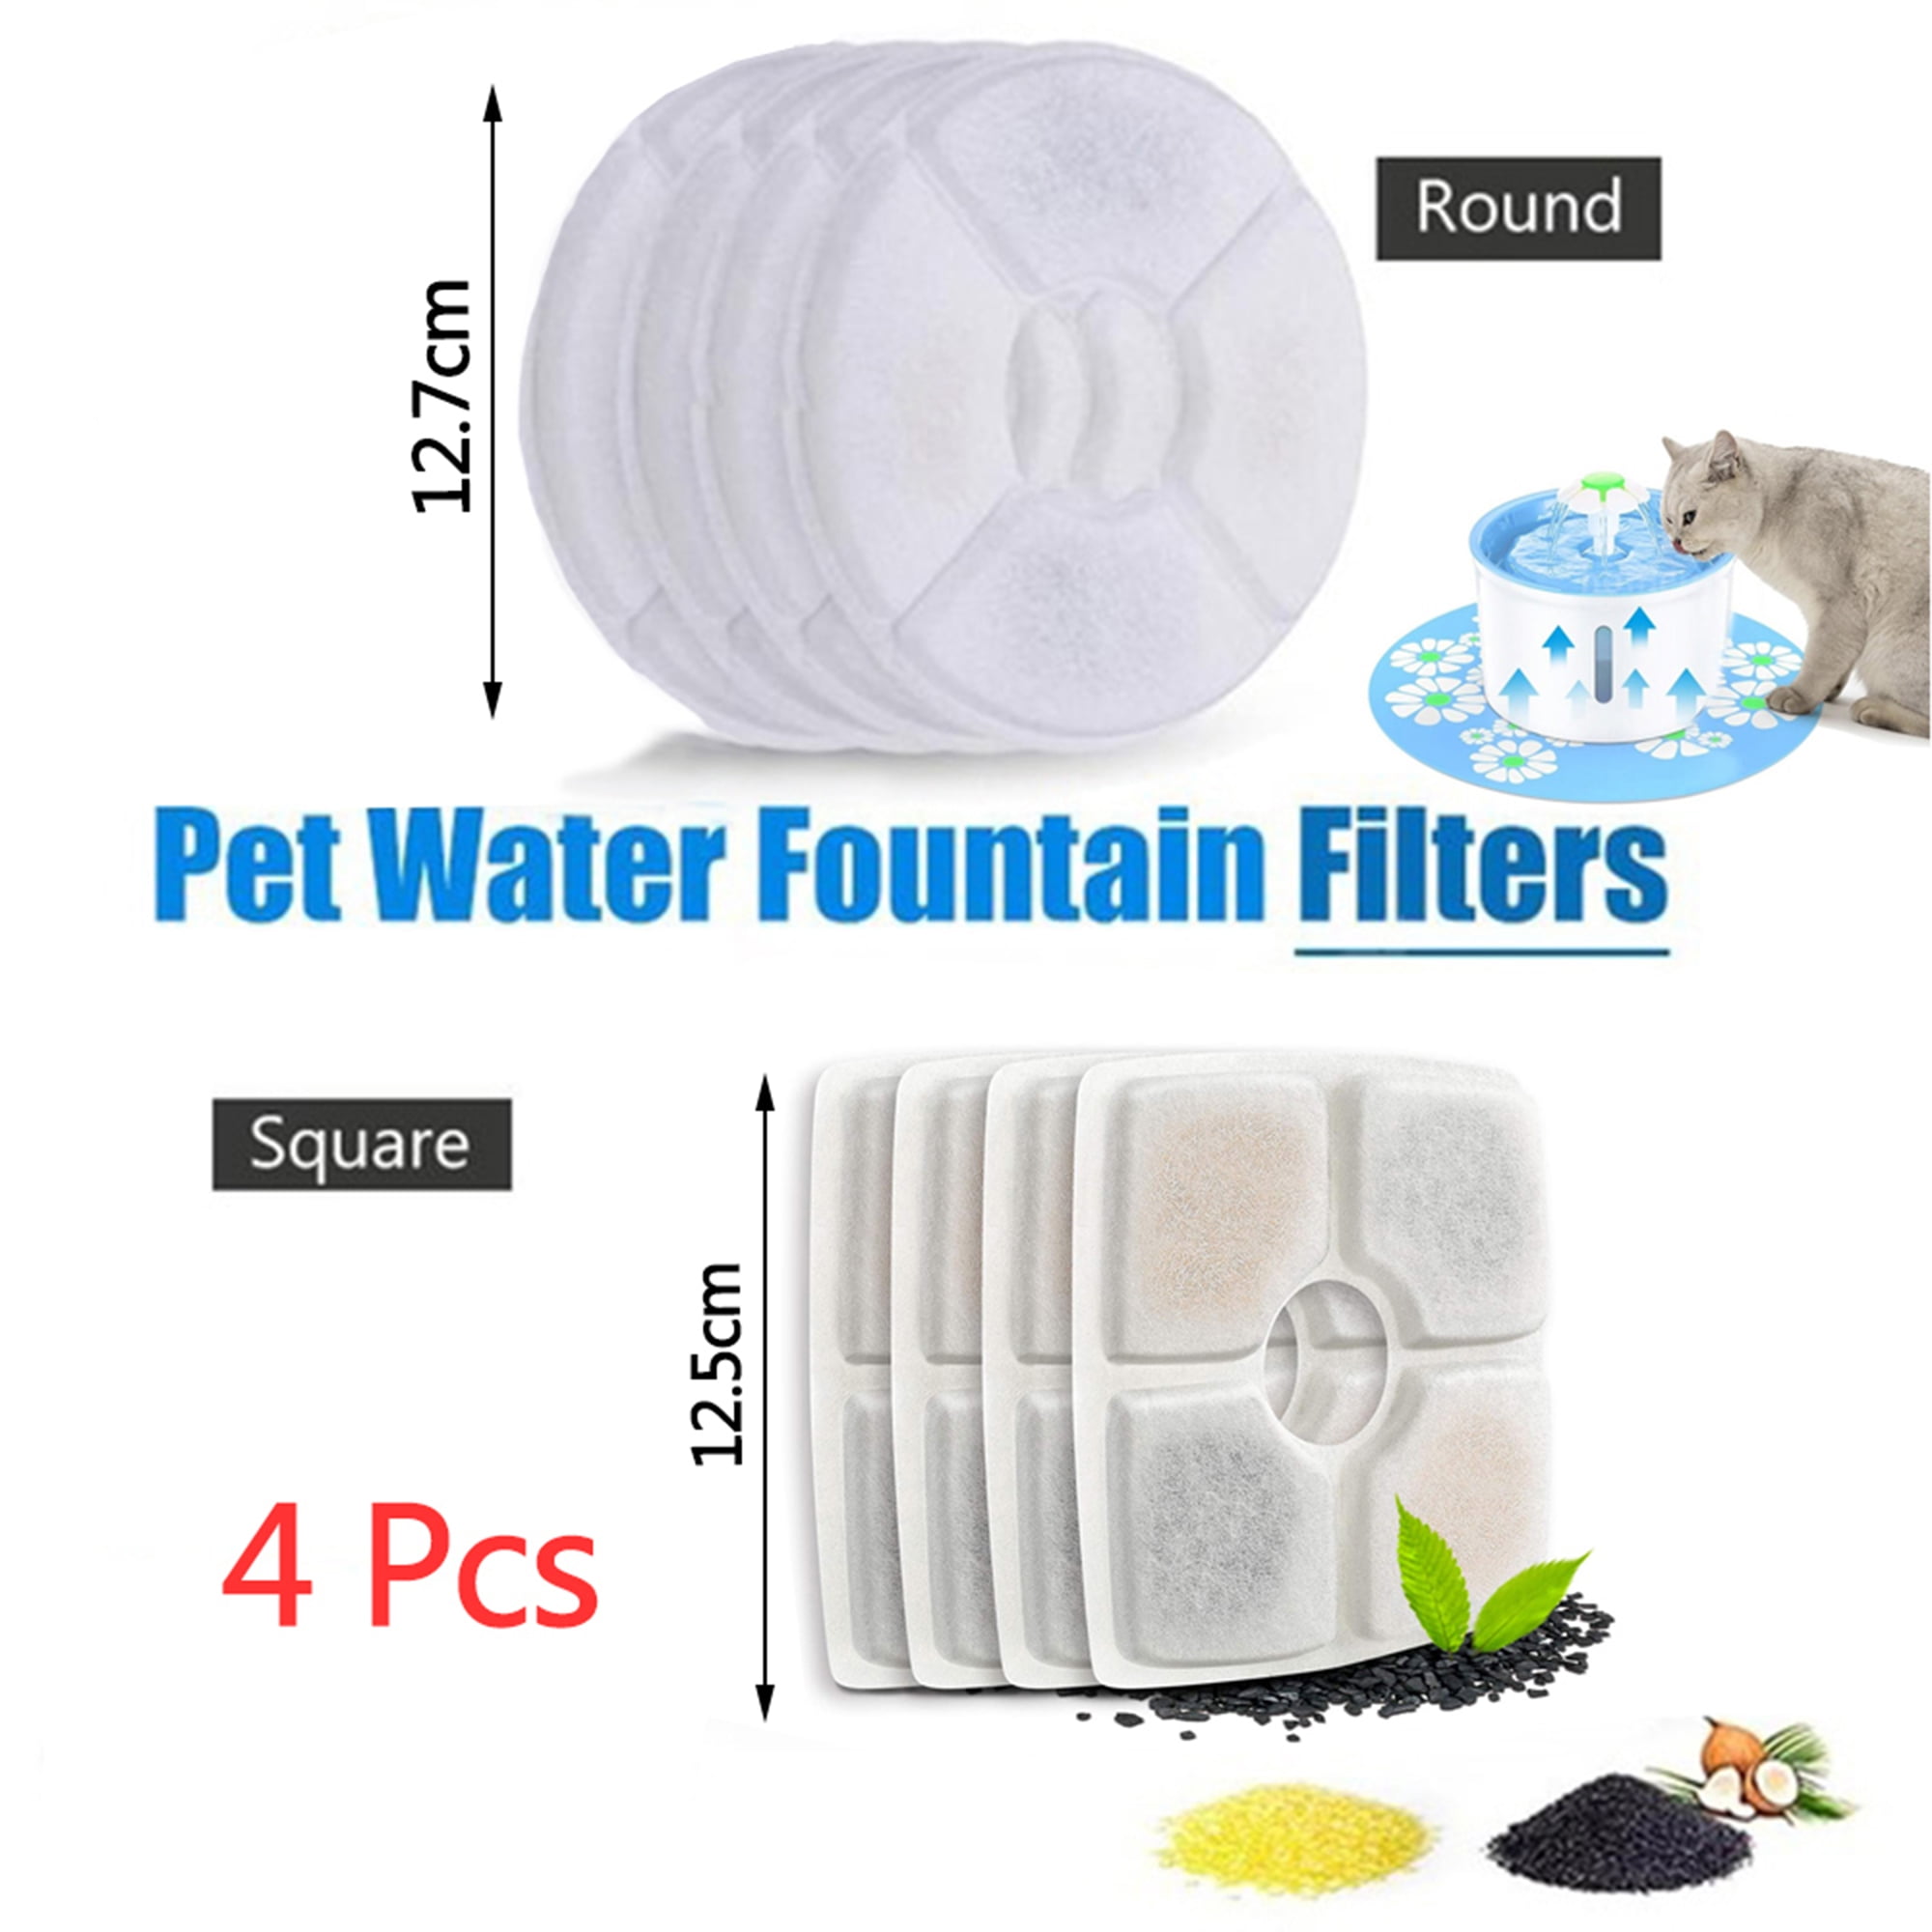 Replacement Carbon Filters 6 Pack Filters for 2L Flower Cat Founta Pet Water Fountain Replacement Carbon Filters 